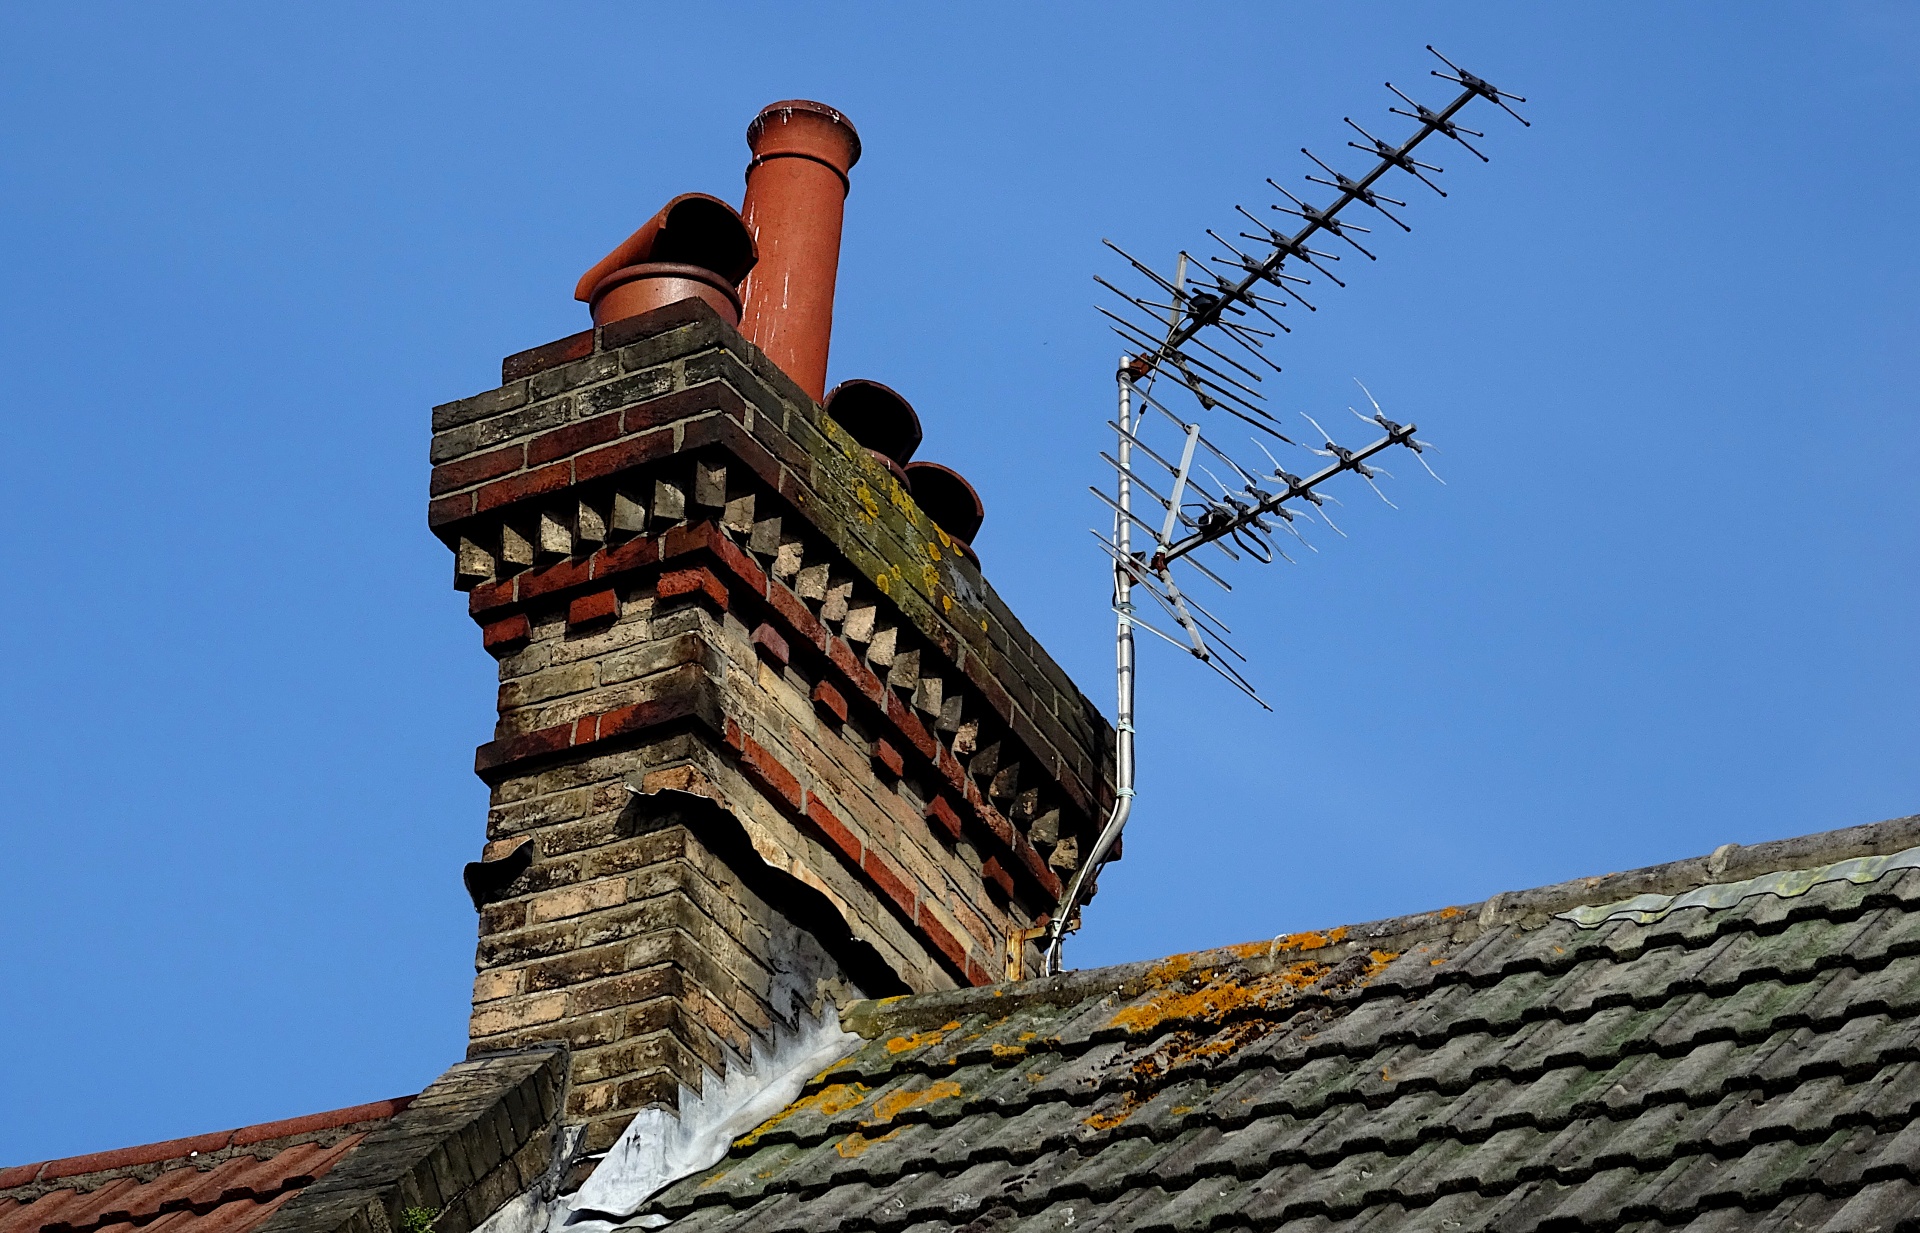 Chimney Stack Pots And TV Antennas